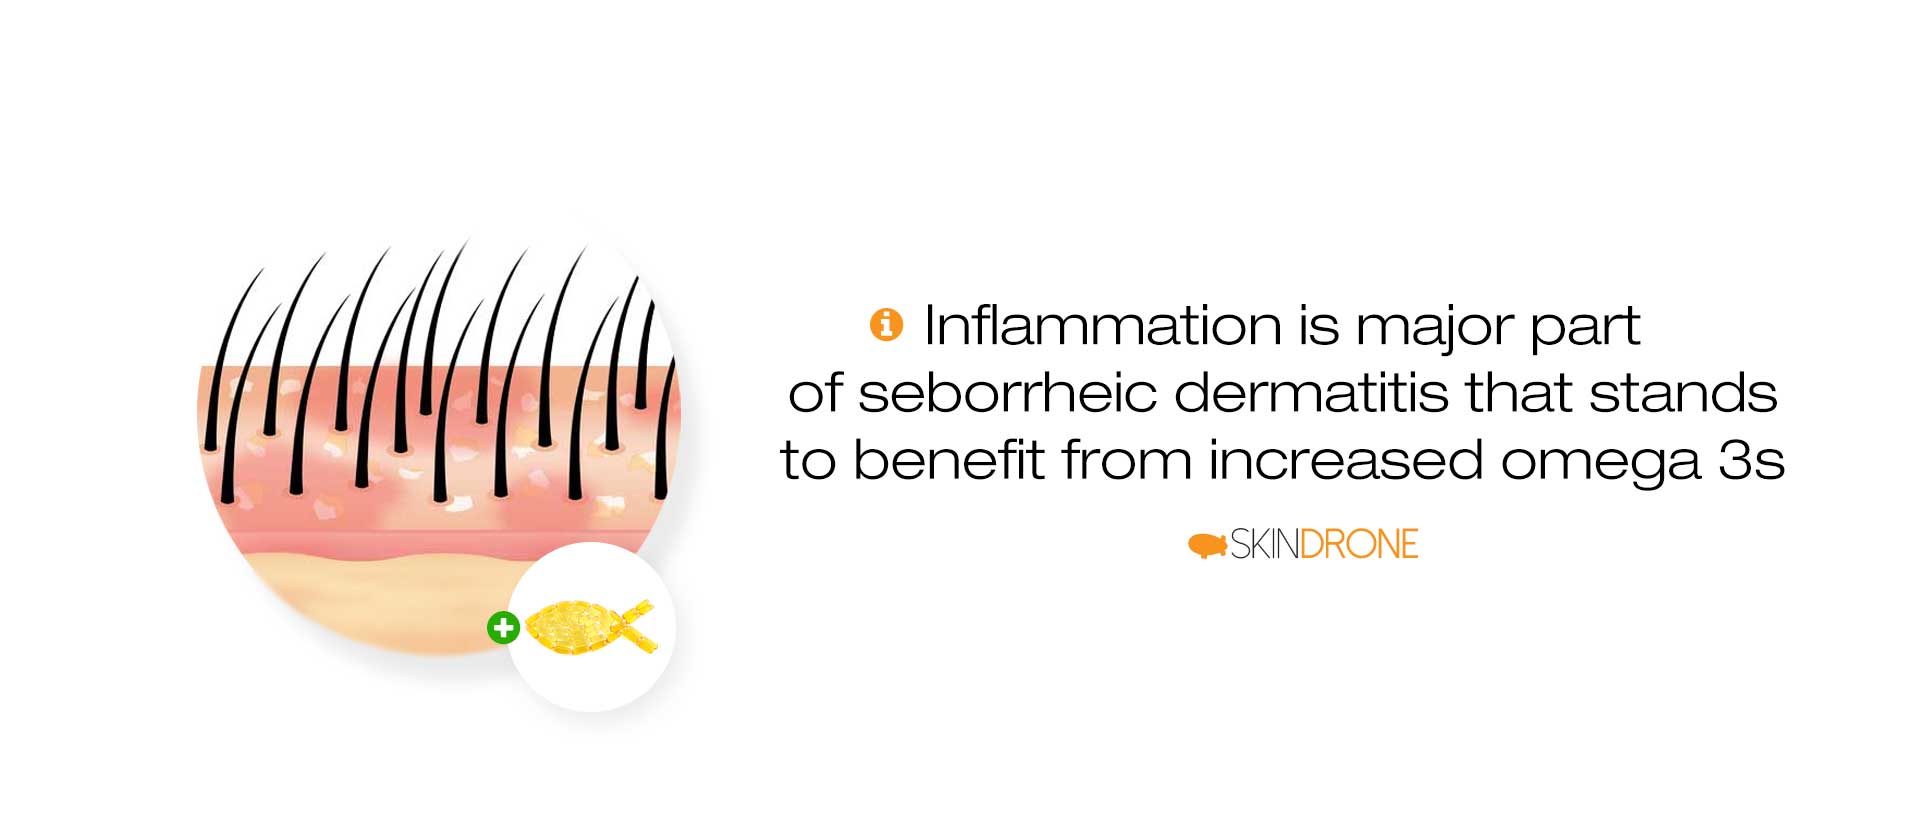 Banner stating that inflammation is a major part of seborrheic dermatitis that stands to benefit from increased omega 3s - image shows a diagram of seborrheic dermatitis on the scalp and the inflammation present together with a small circle that contains fish oil capsules in the shape of a small fish